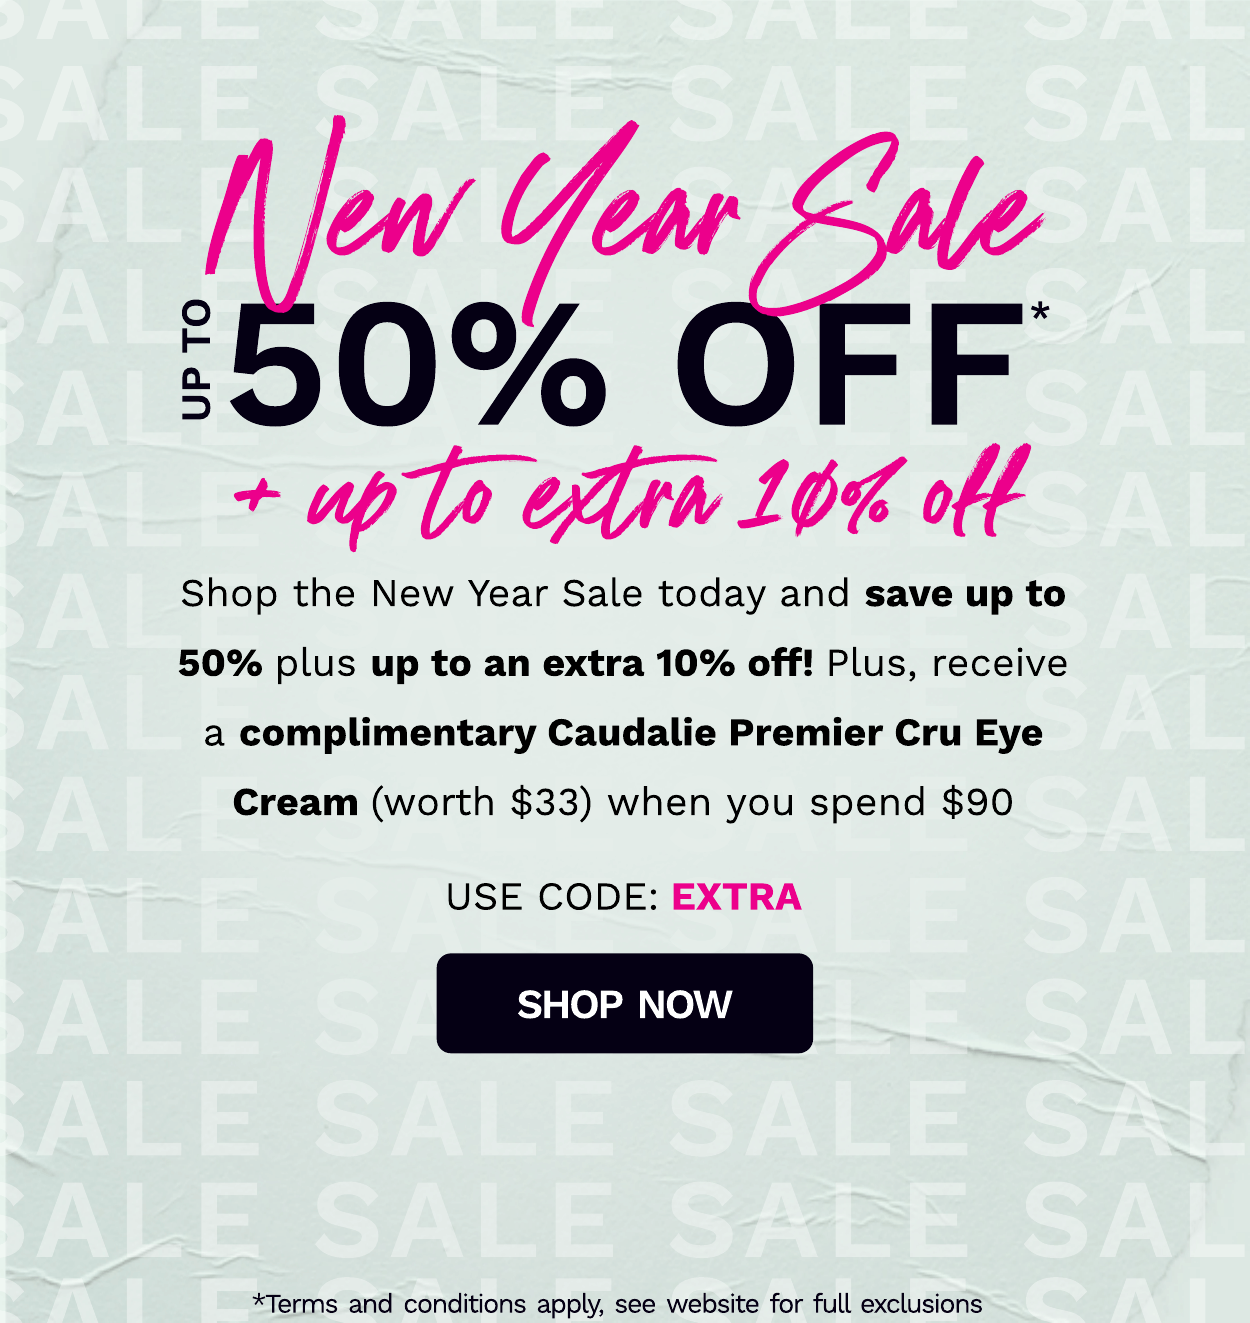 Look Fantastic Sale: Take Up To 50% + Up To EXTRA 10% Off & Free Gift!